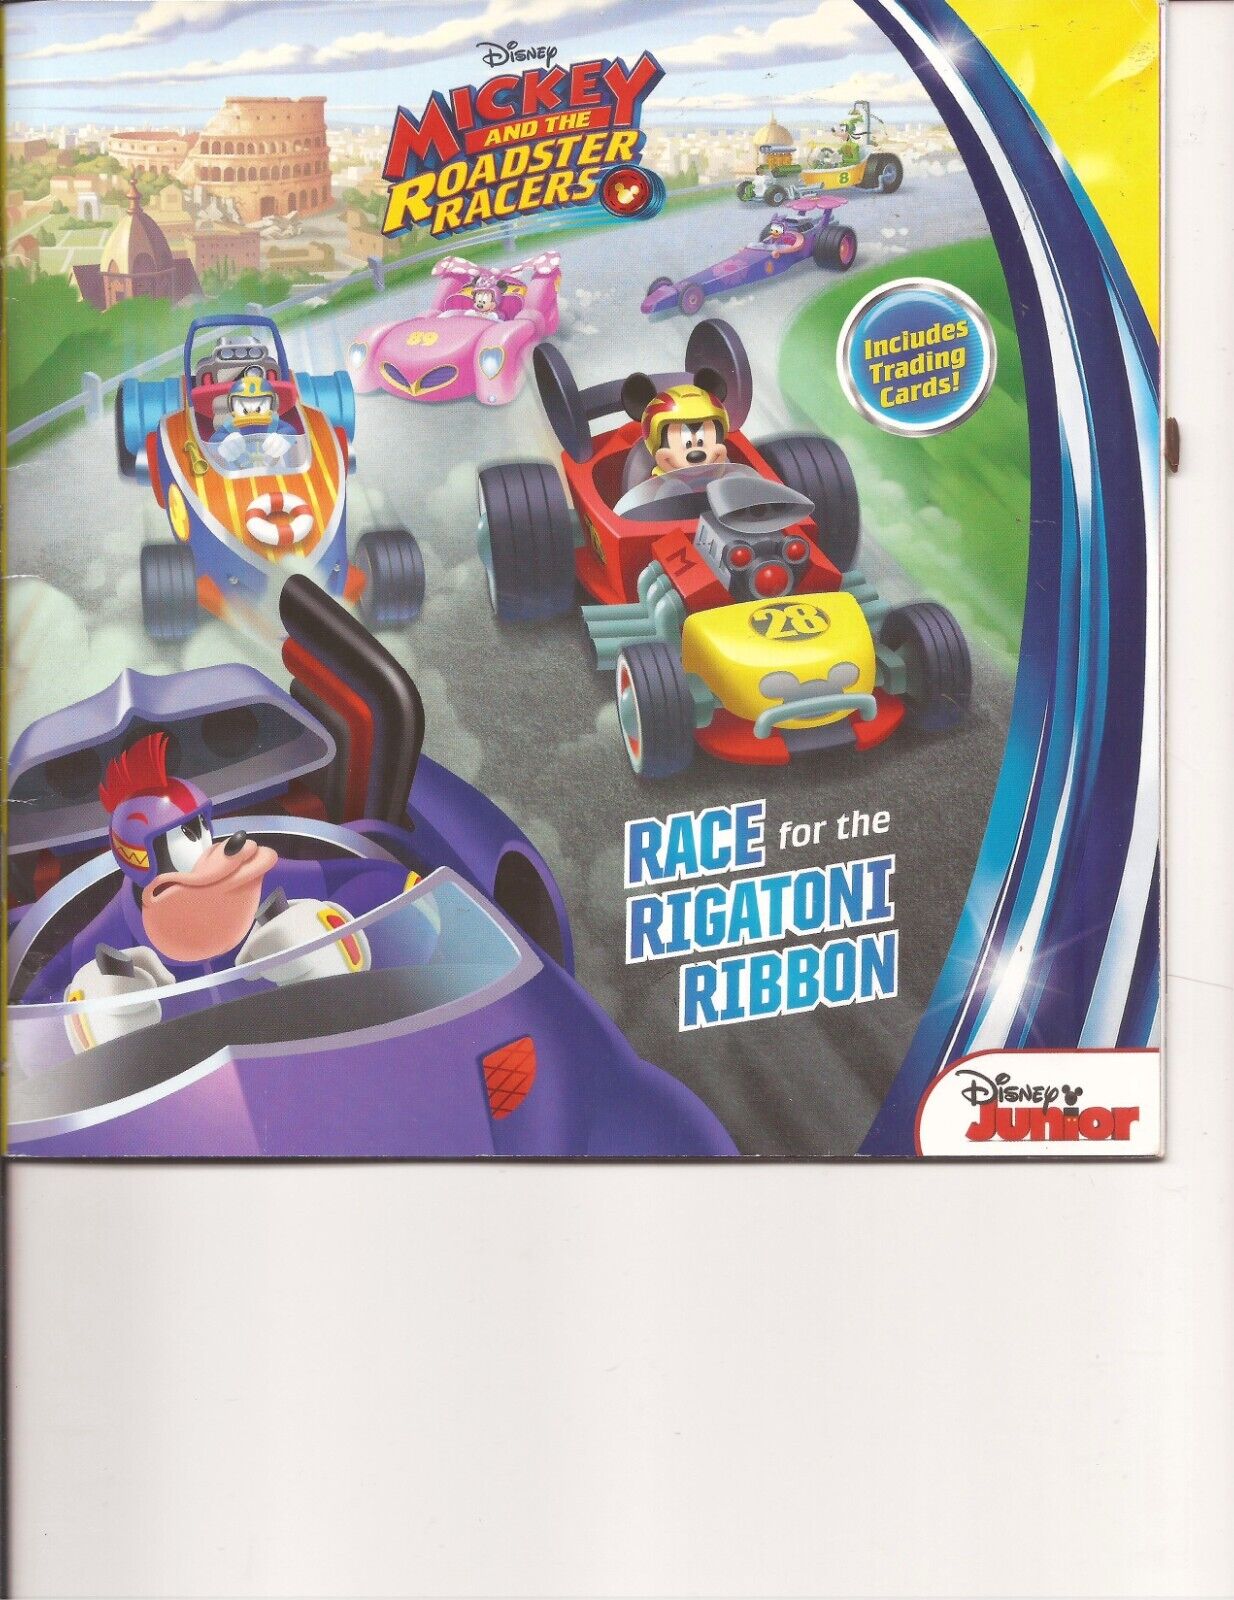 Disney Mickey and the Roadster Racers Race for the Rigatoni Ribbon, Jan 2017